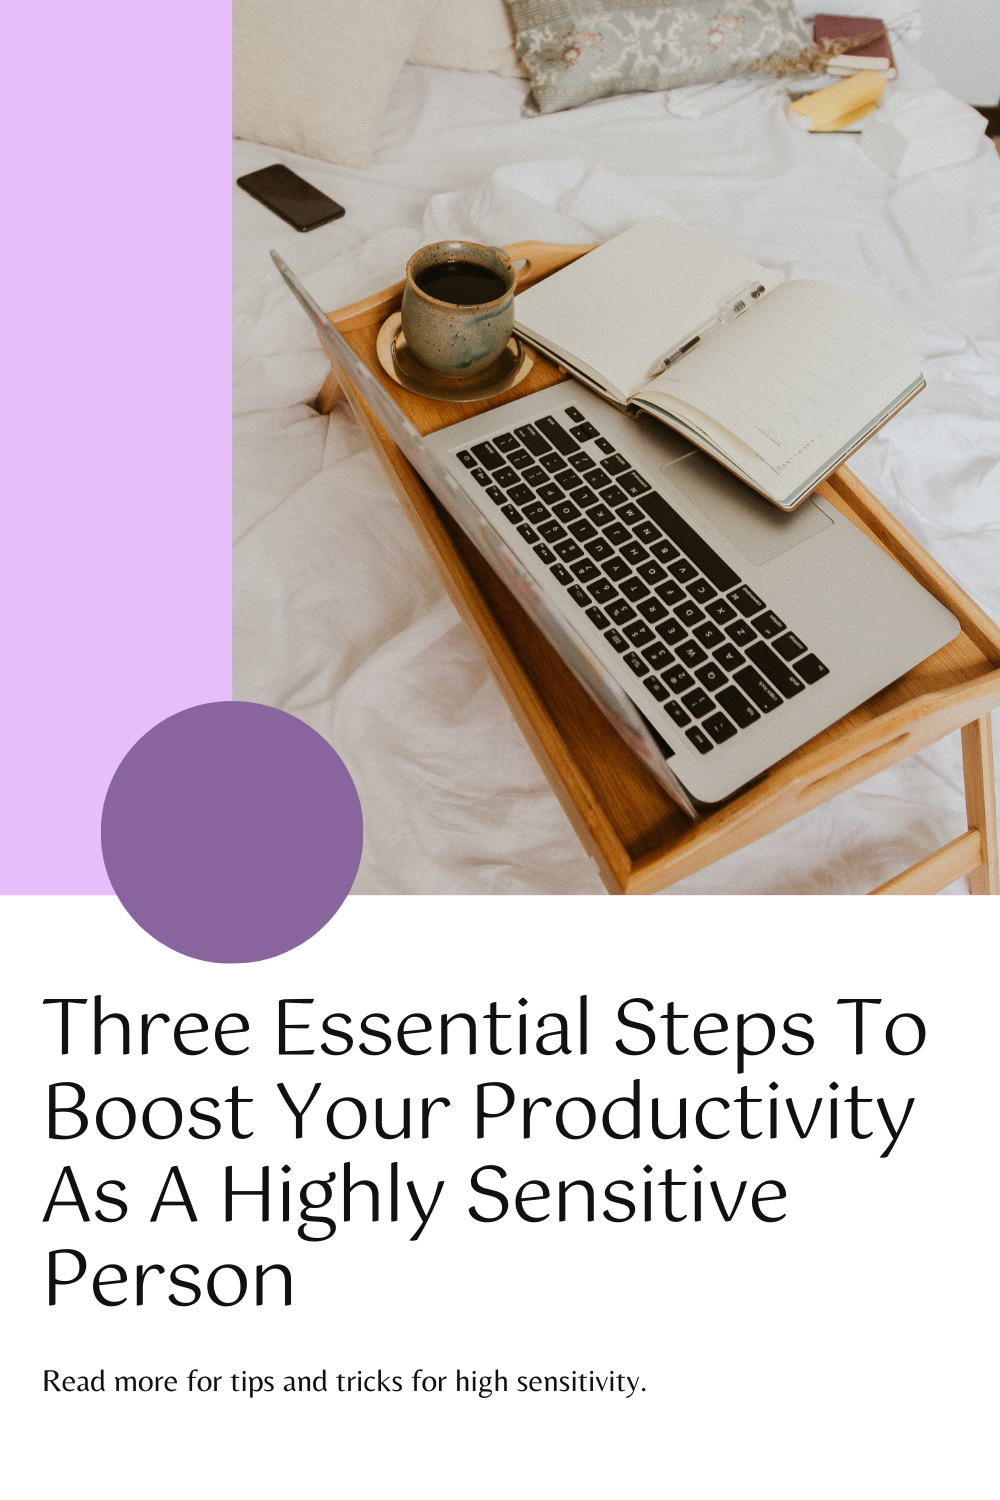 three essential steps to better productivity as an HSP